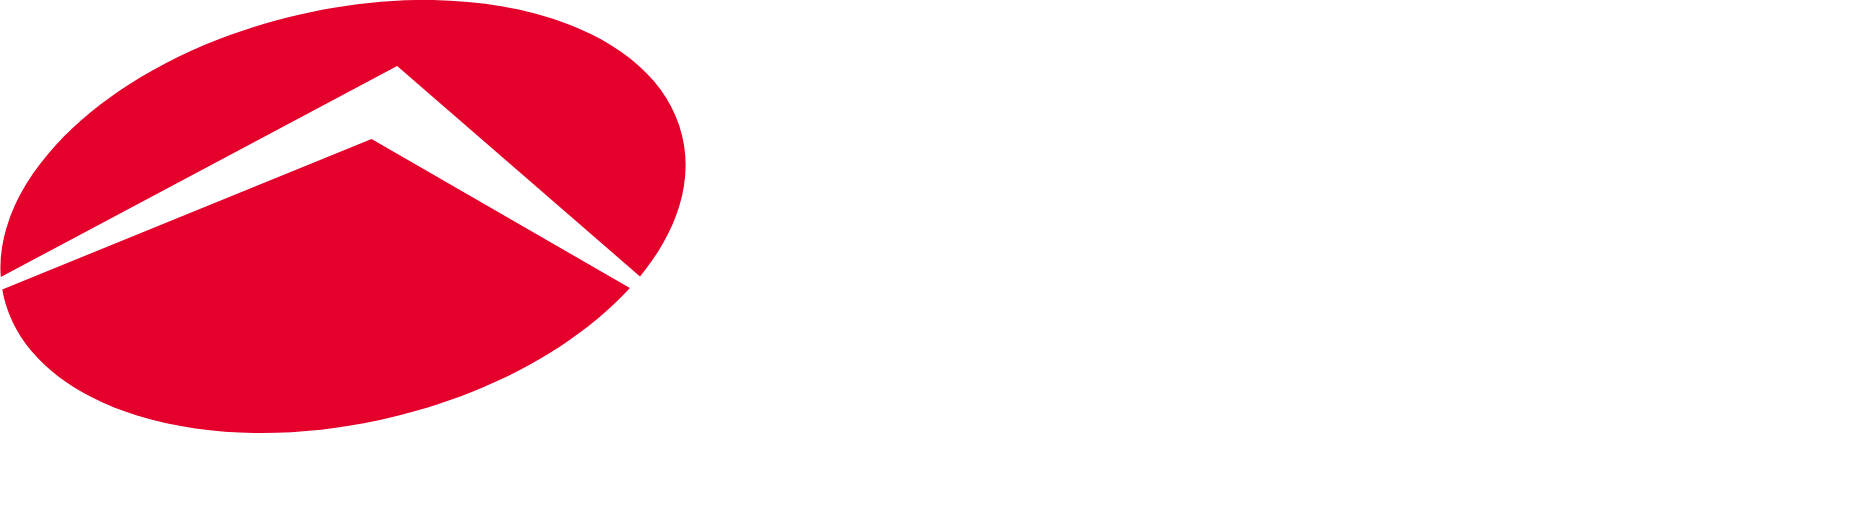 ATI Physical Therapy logo large for dark backgrounds (transparent PNG)